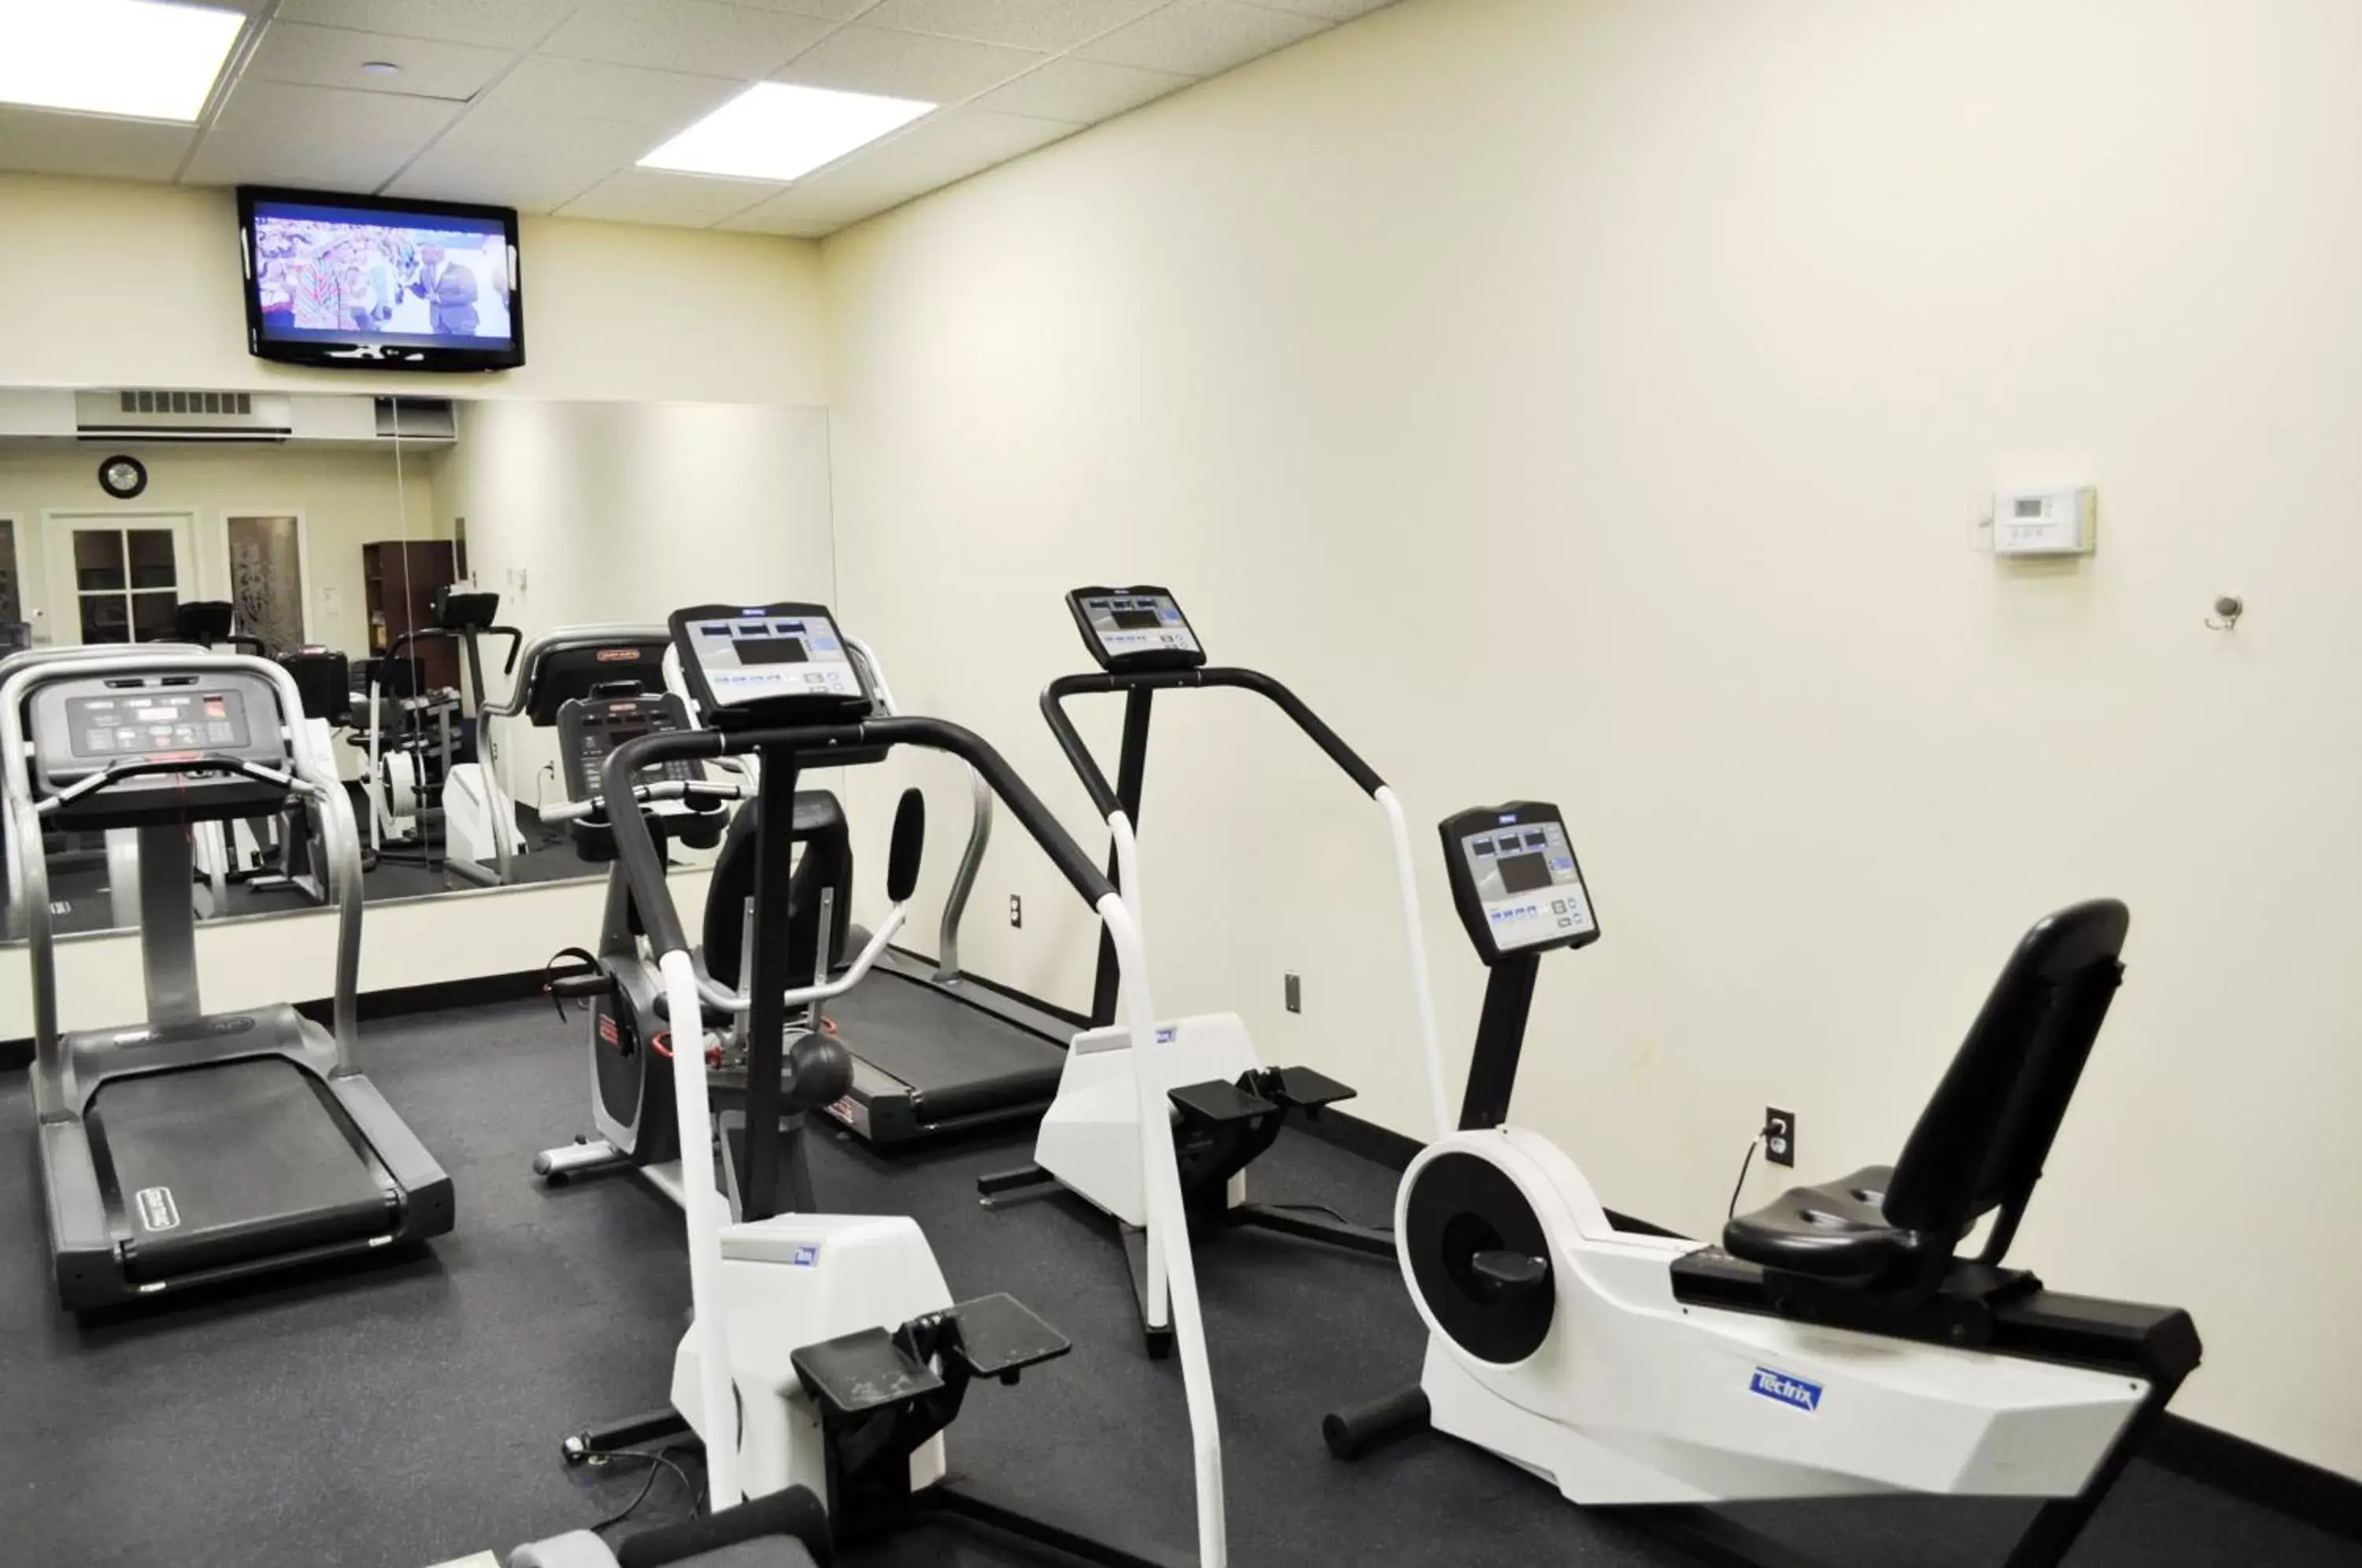 Fitness centre/facilities, Fitness Center/Facilities in Wyndham Garden Baronne Plaza